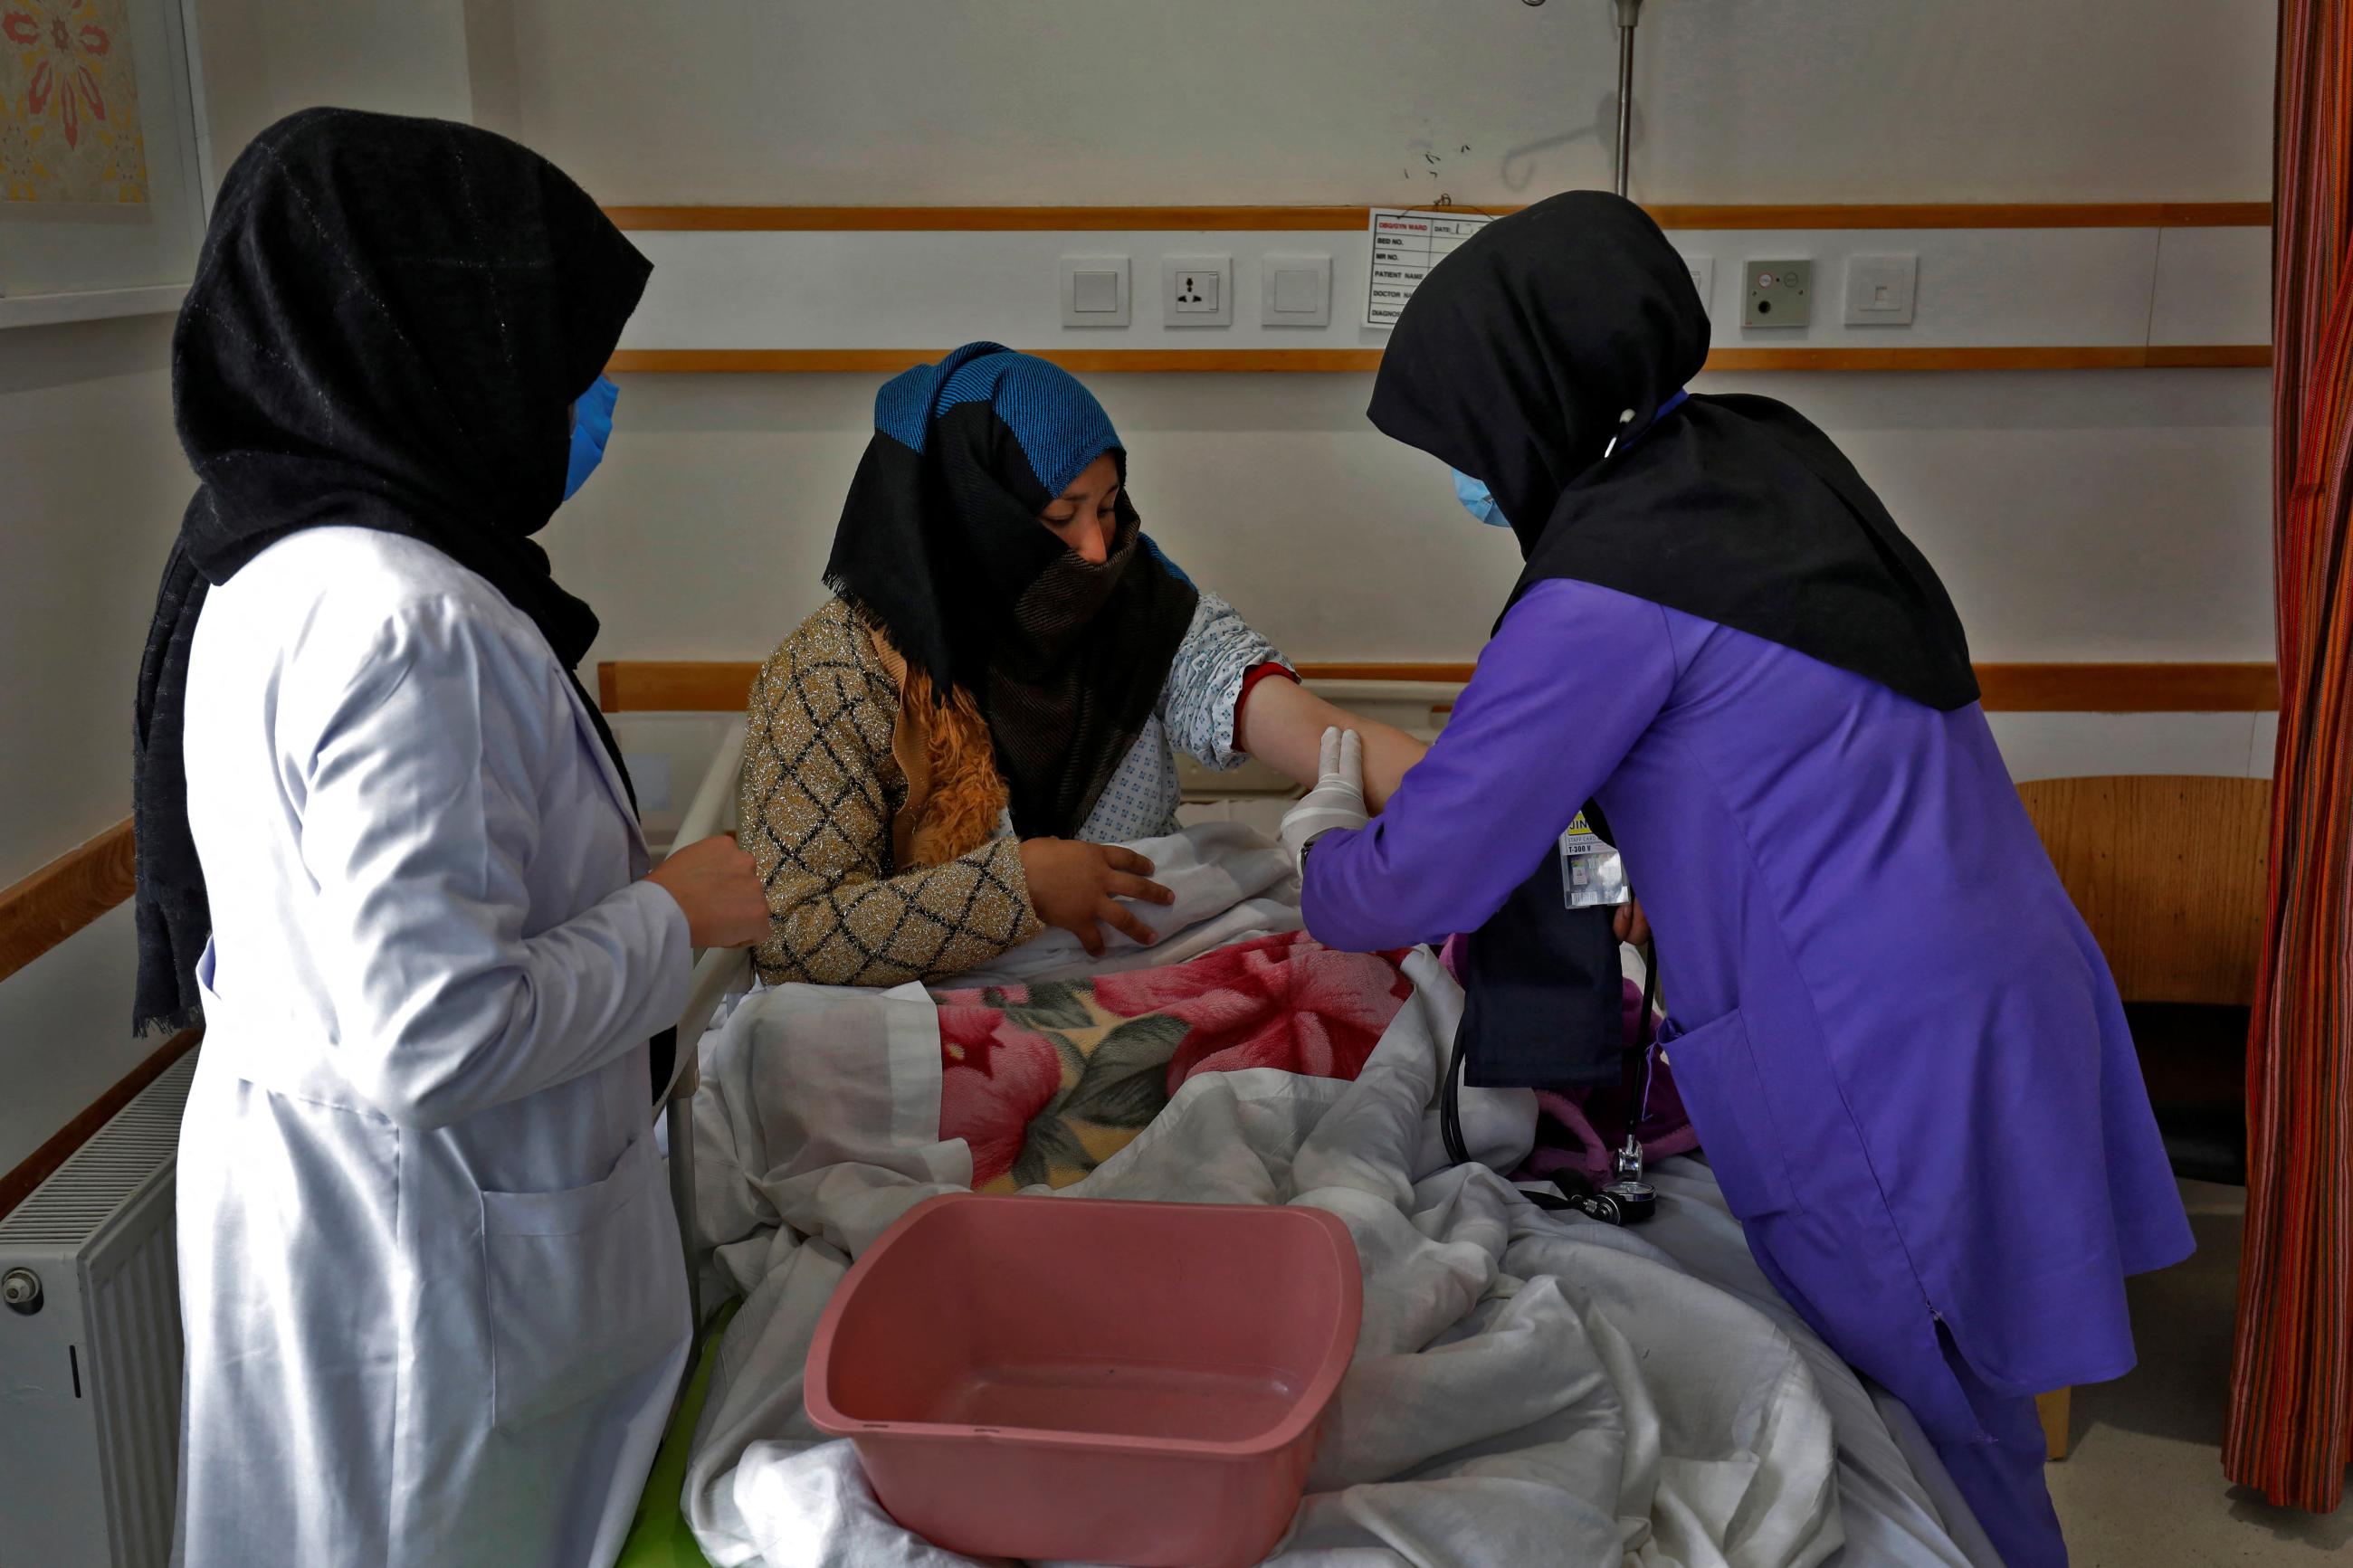 A trainee midwife examines a woman at a hospital.